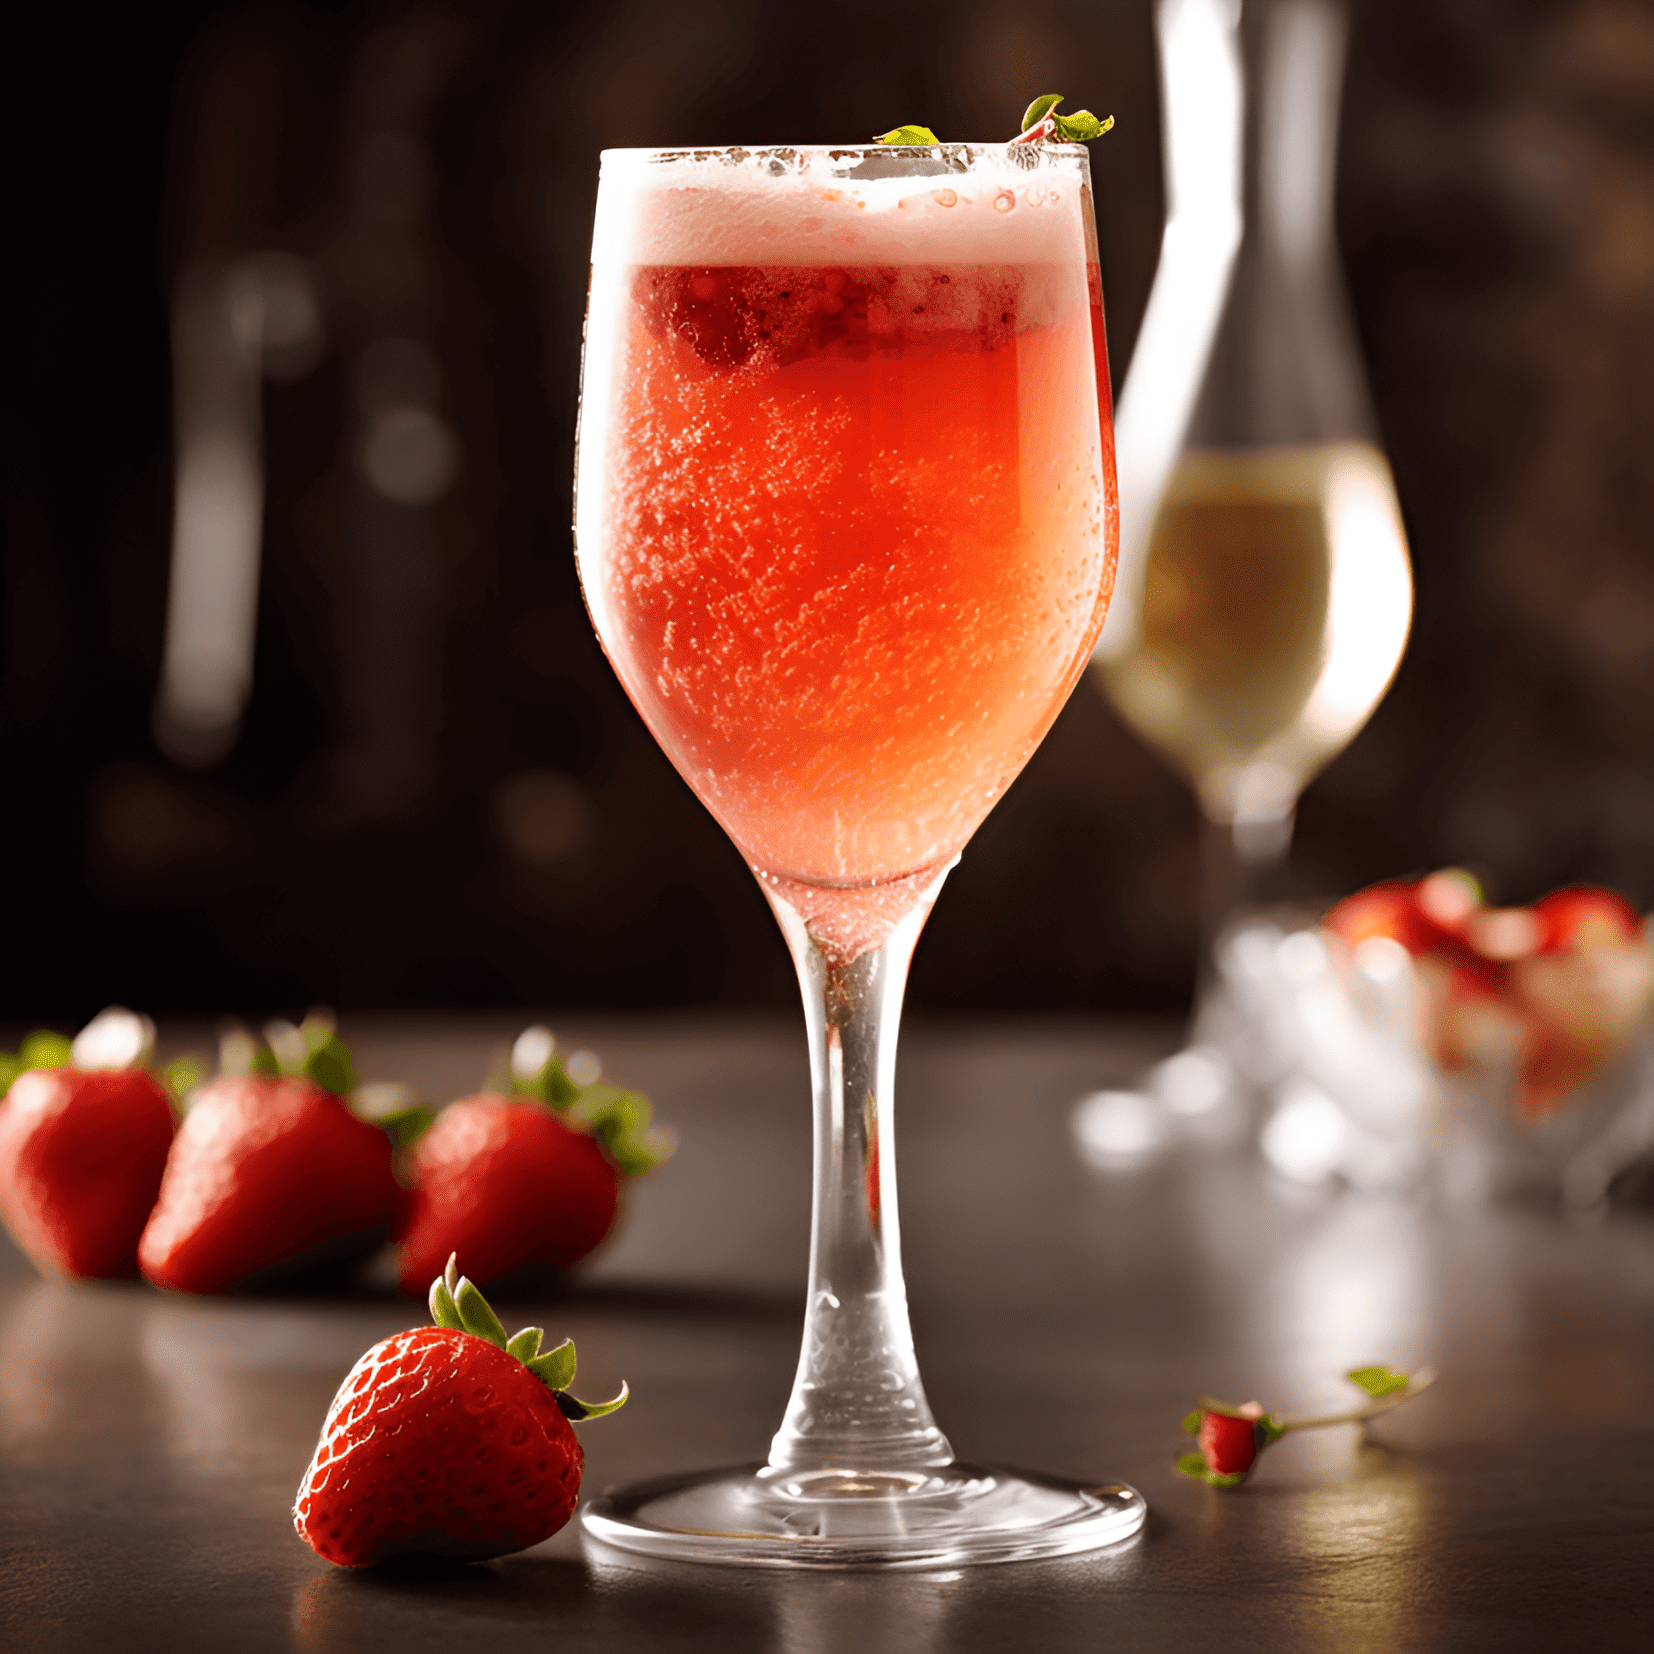 Rossini Cocktail Recipe - The Rossini cocktail is a delightful combination of sweet, fruity, and slightly tart flavors. The fresh strawberry puree provides a natural sweetness, while the Prosecco adds a touch of crisp acidity and effervescence. Overall, it's a light, refreshing, and well-balanced drink.